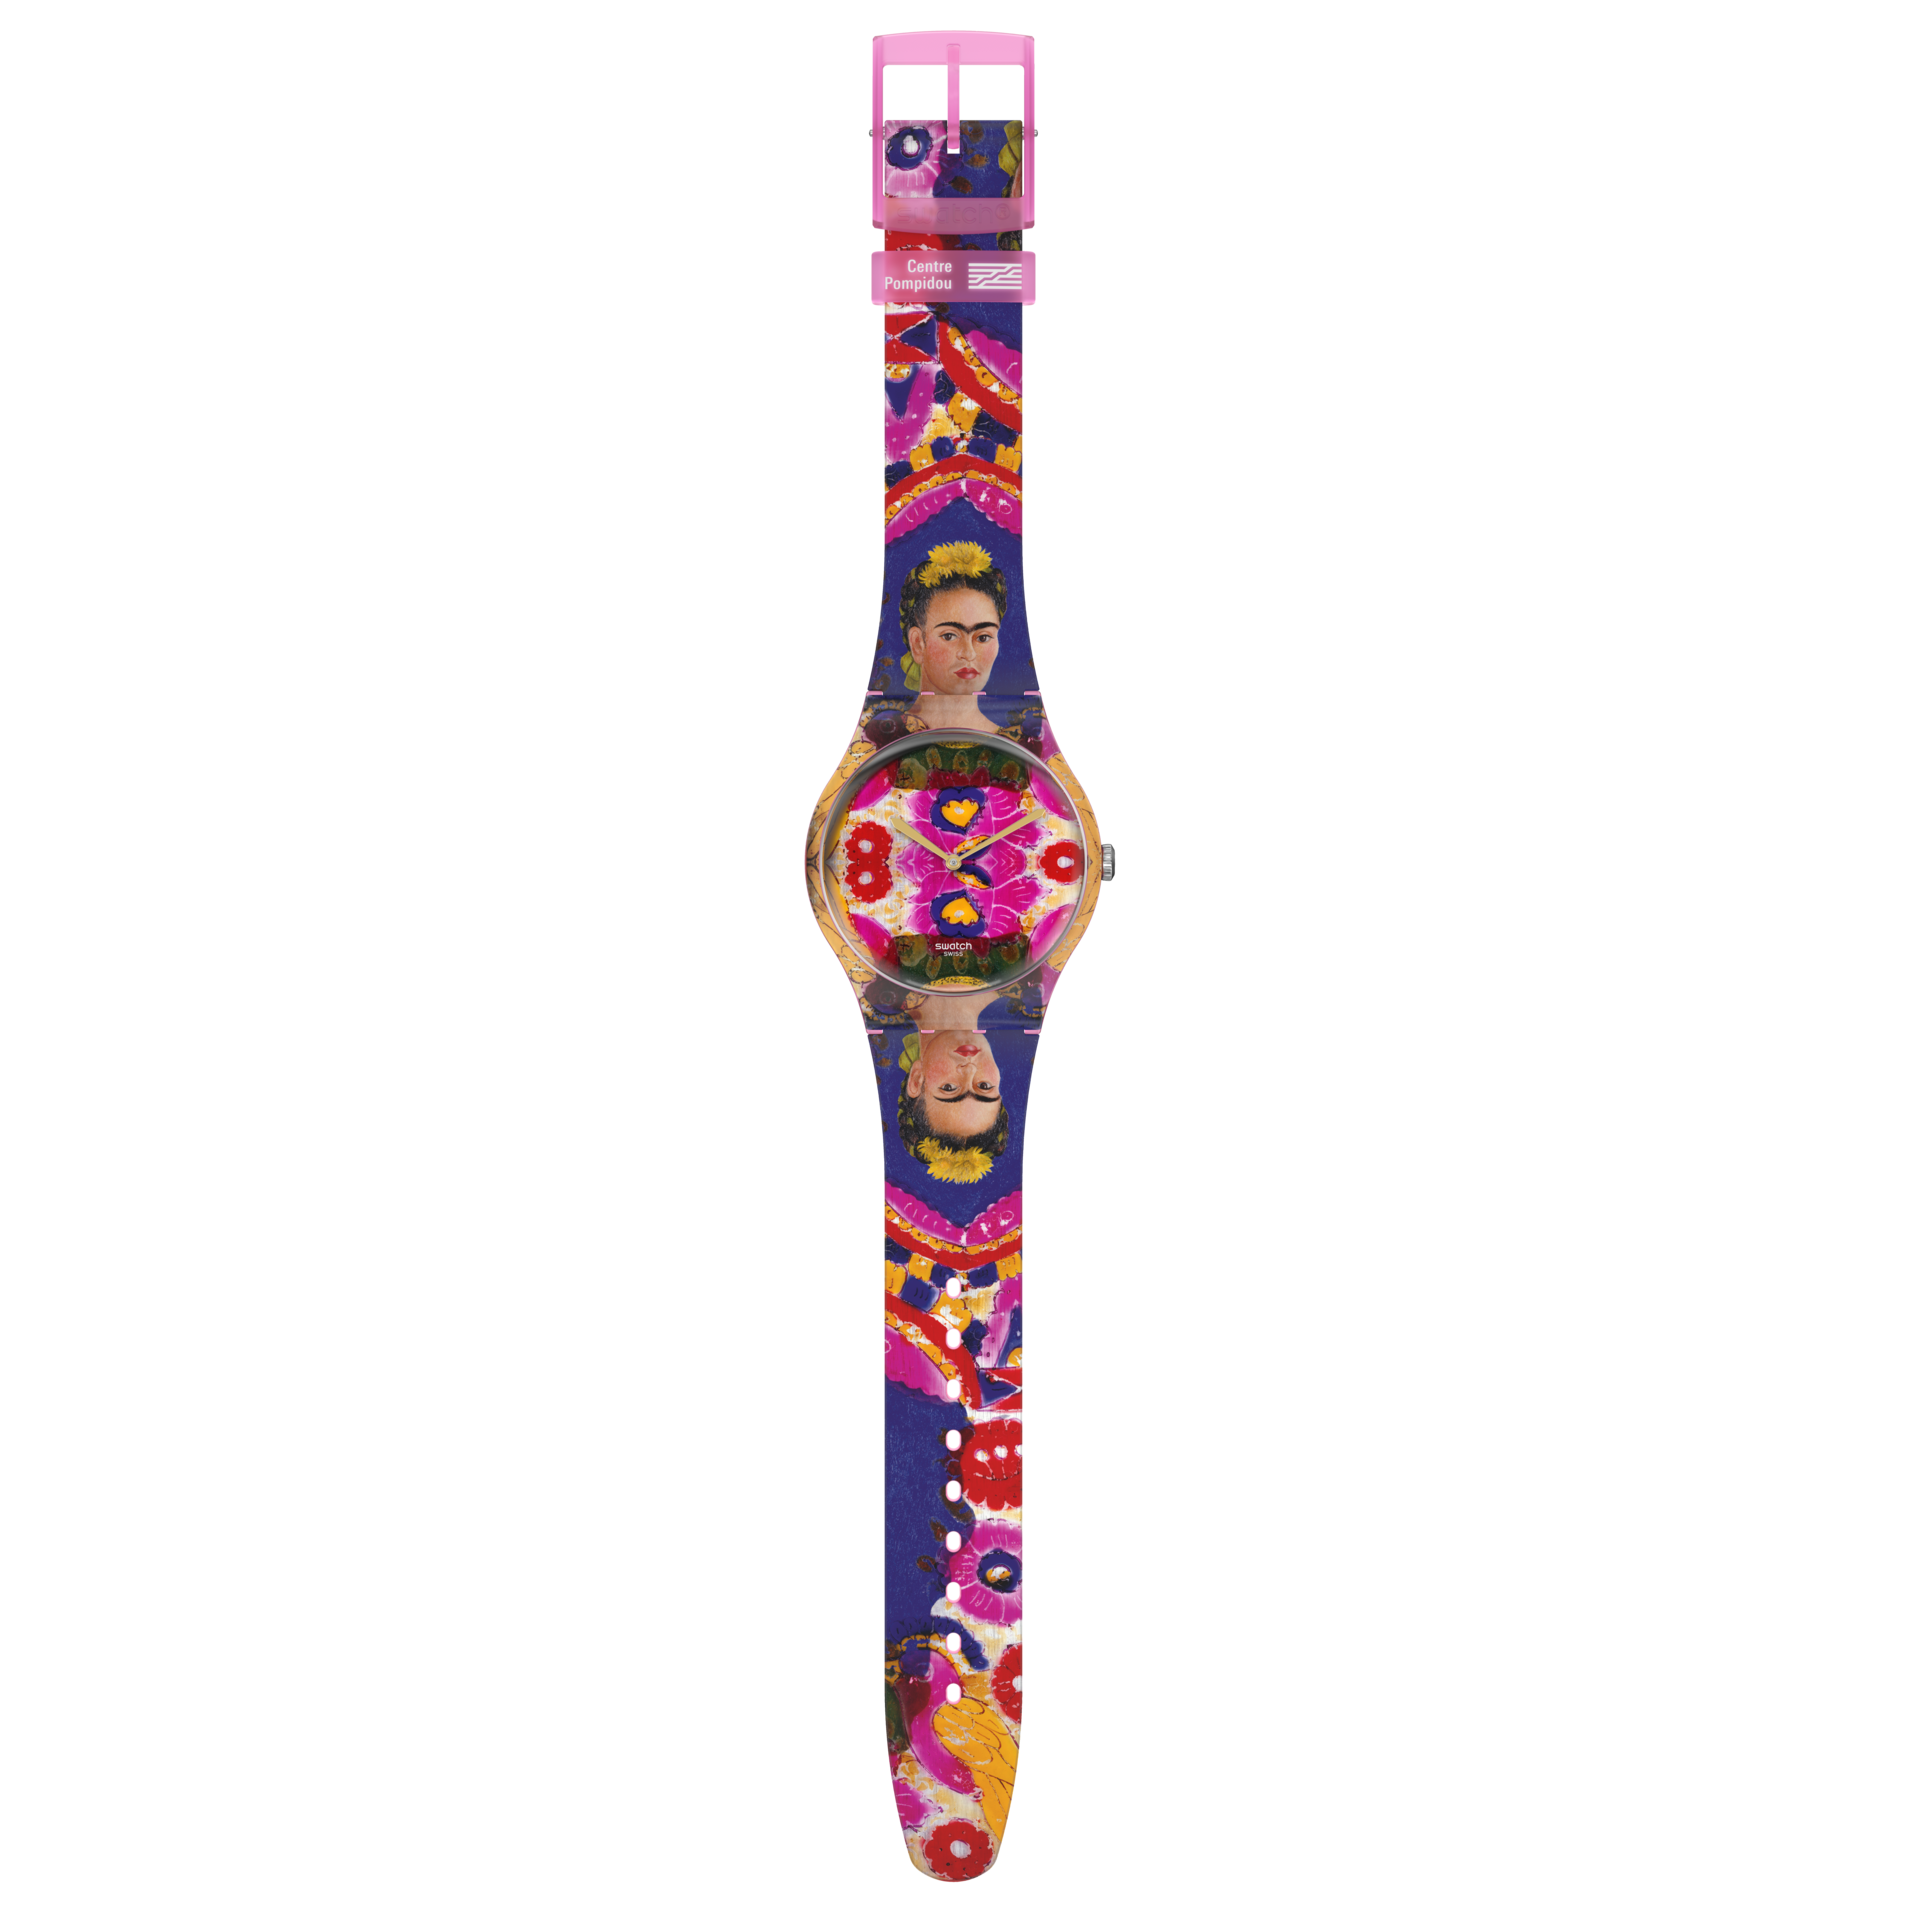 The Frame, By Frida Kahlo | Swatch | Luby 